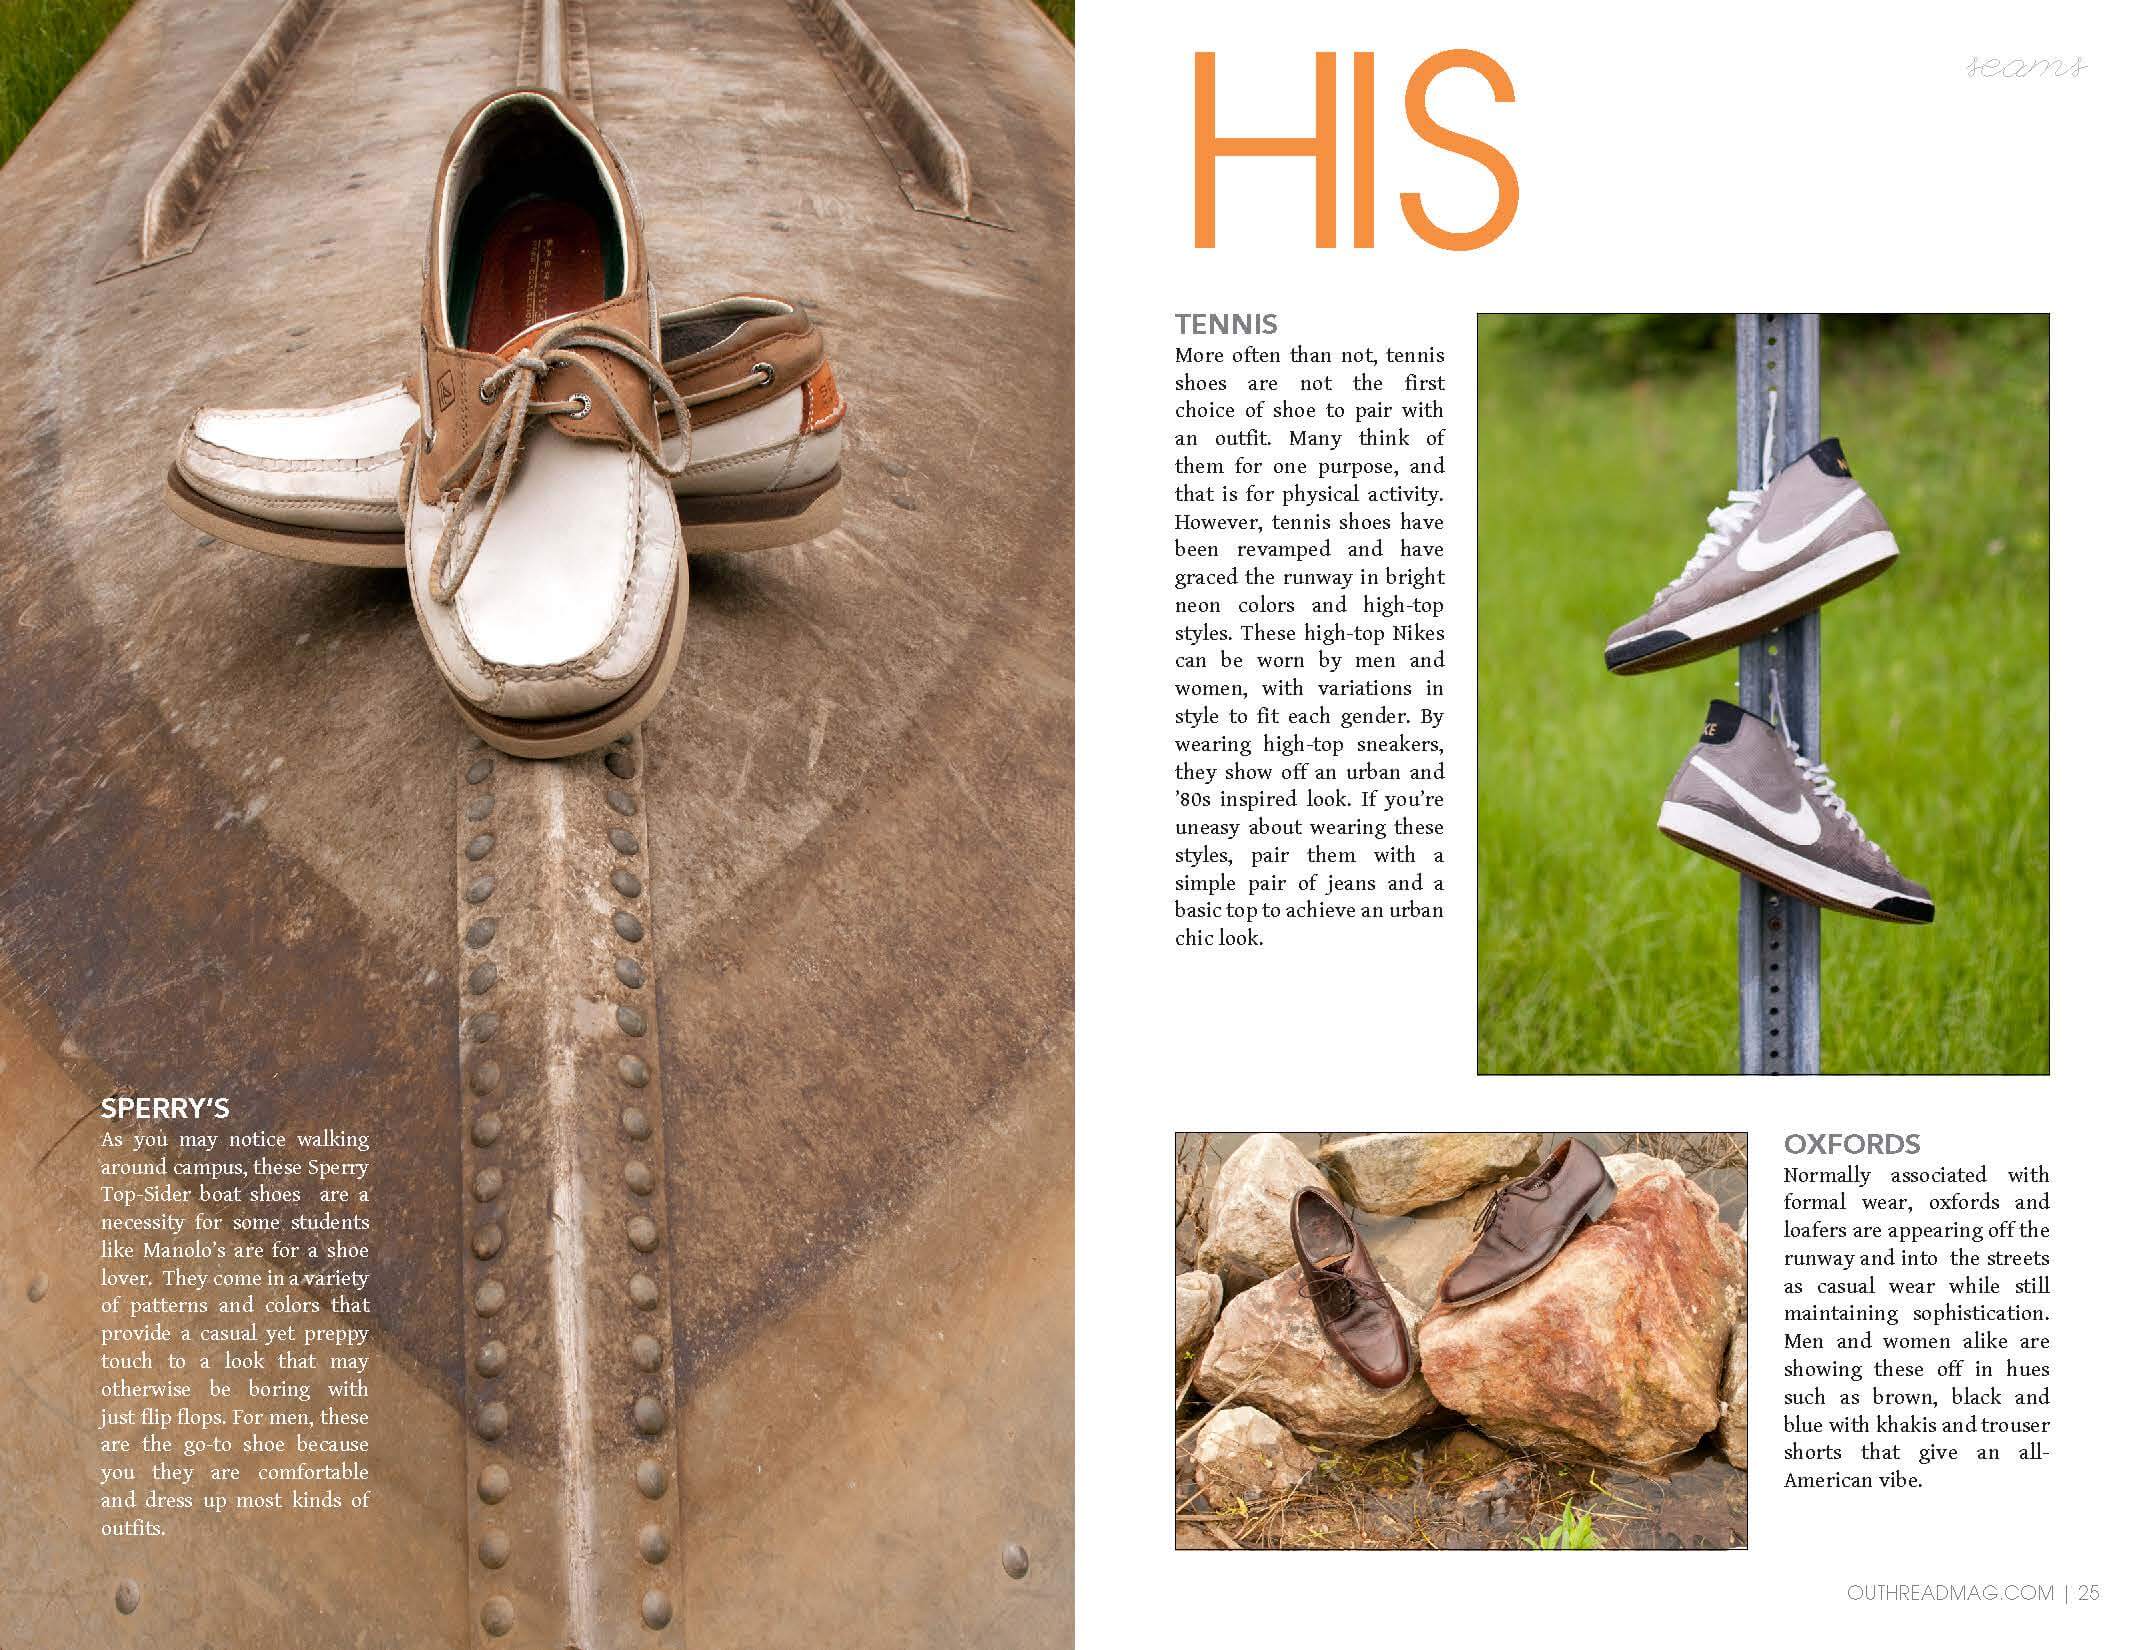 His and Her Shoes by Megan Hillman